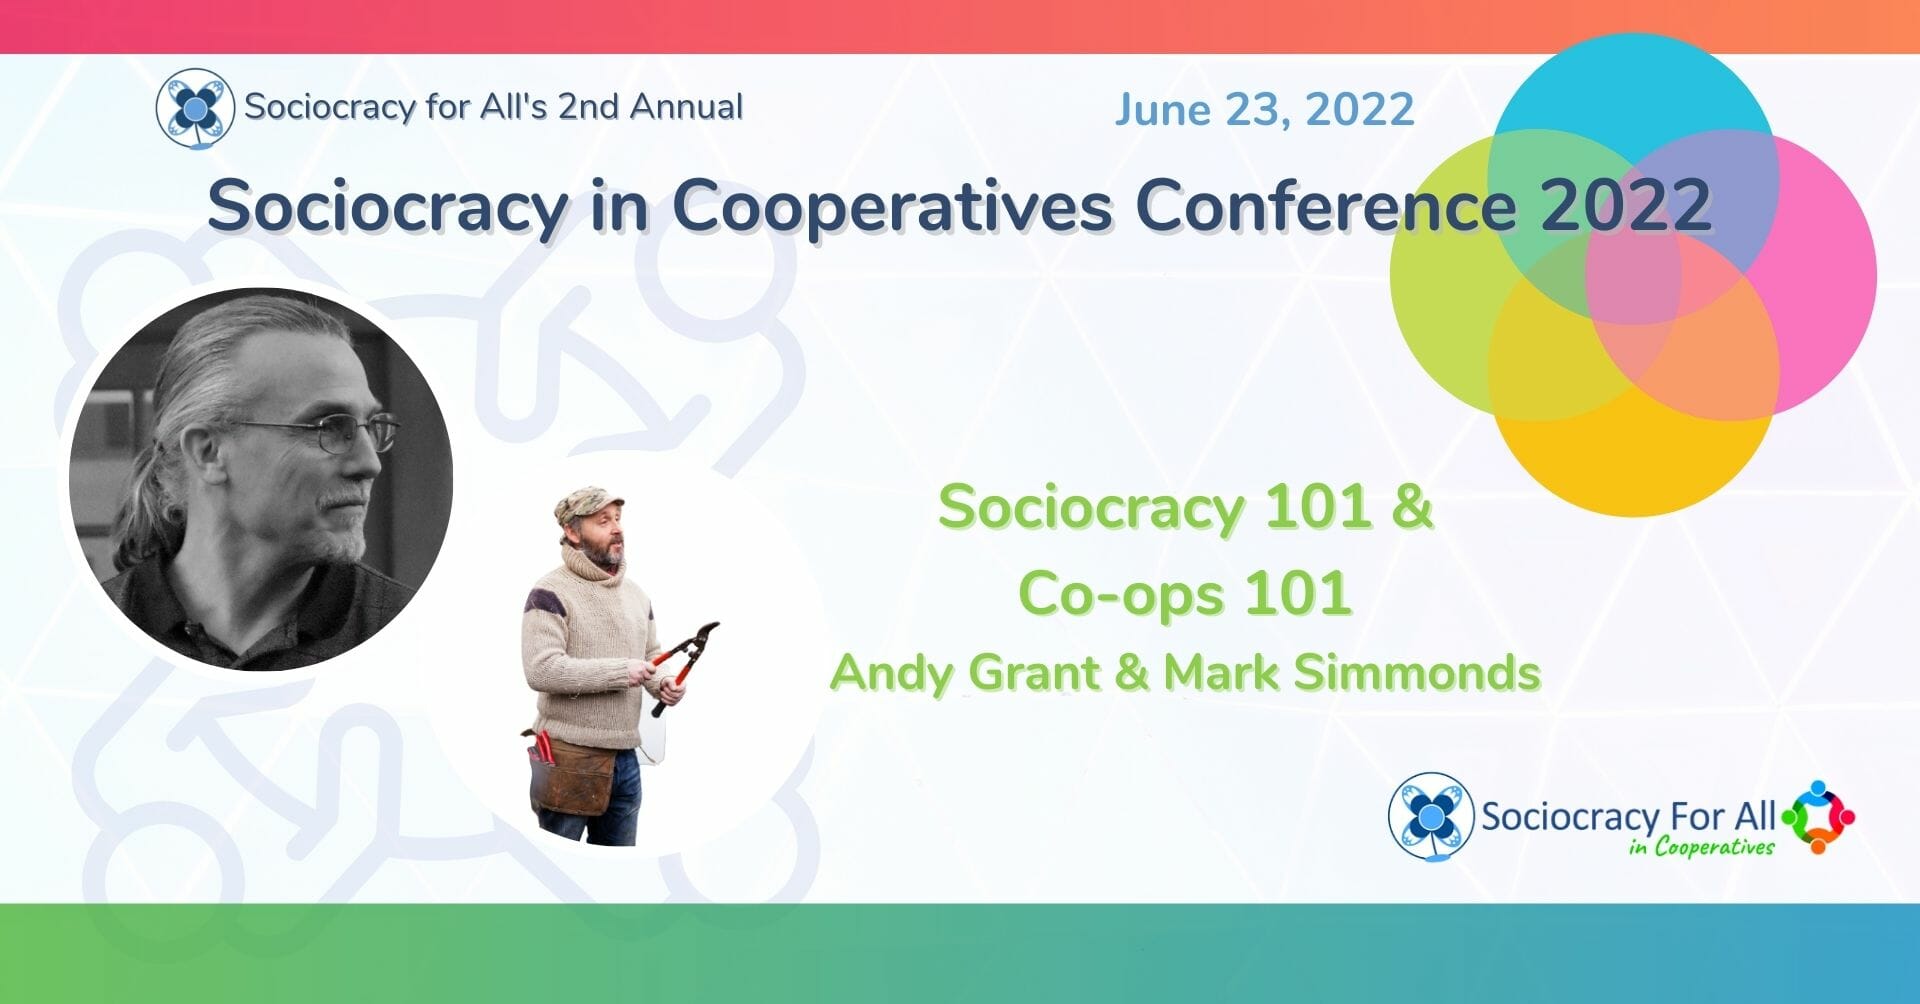 Sociocracy 101 & Co-ops 101 –Andy Grant & Mark Simmonds